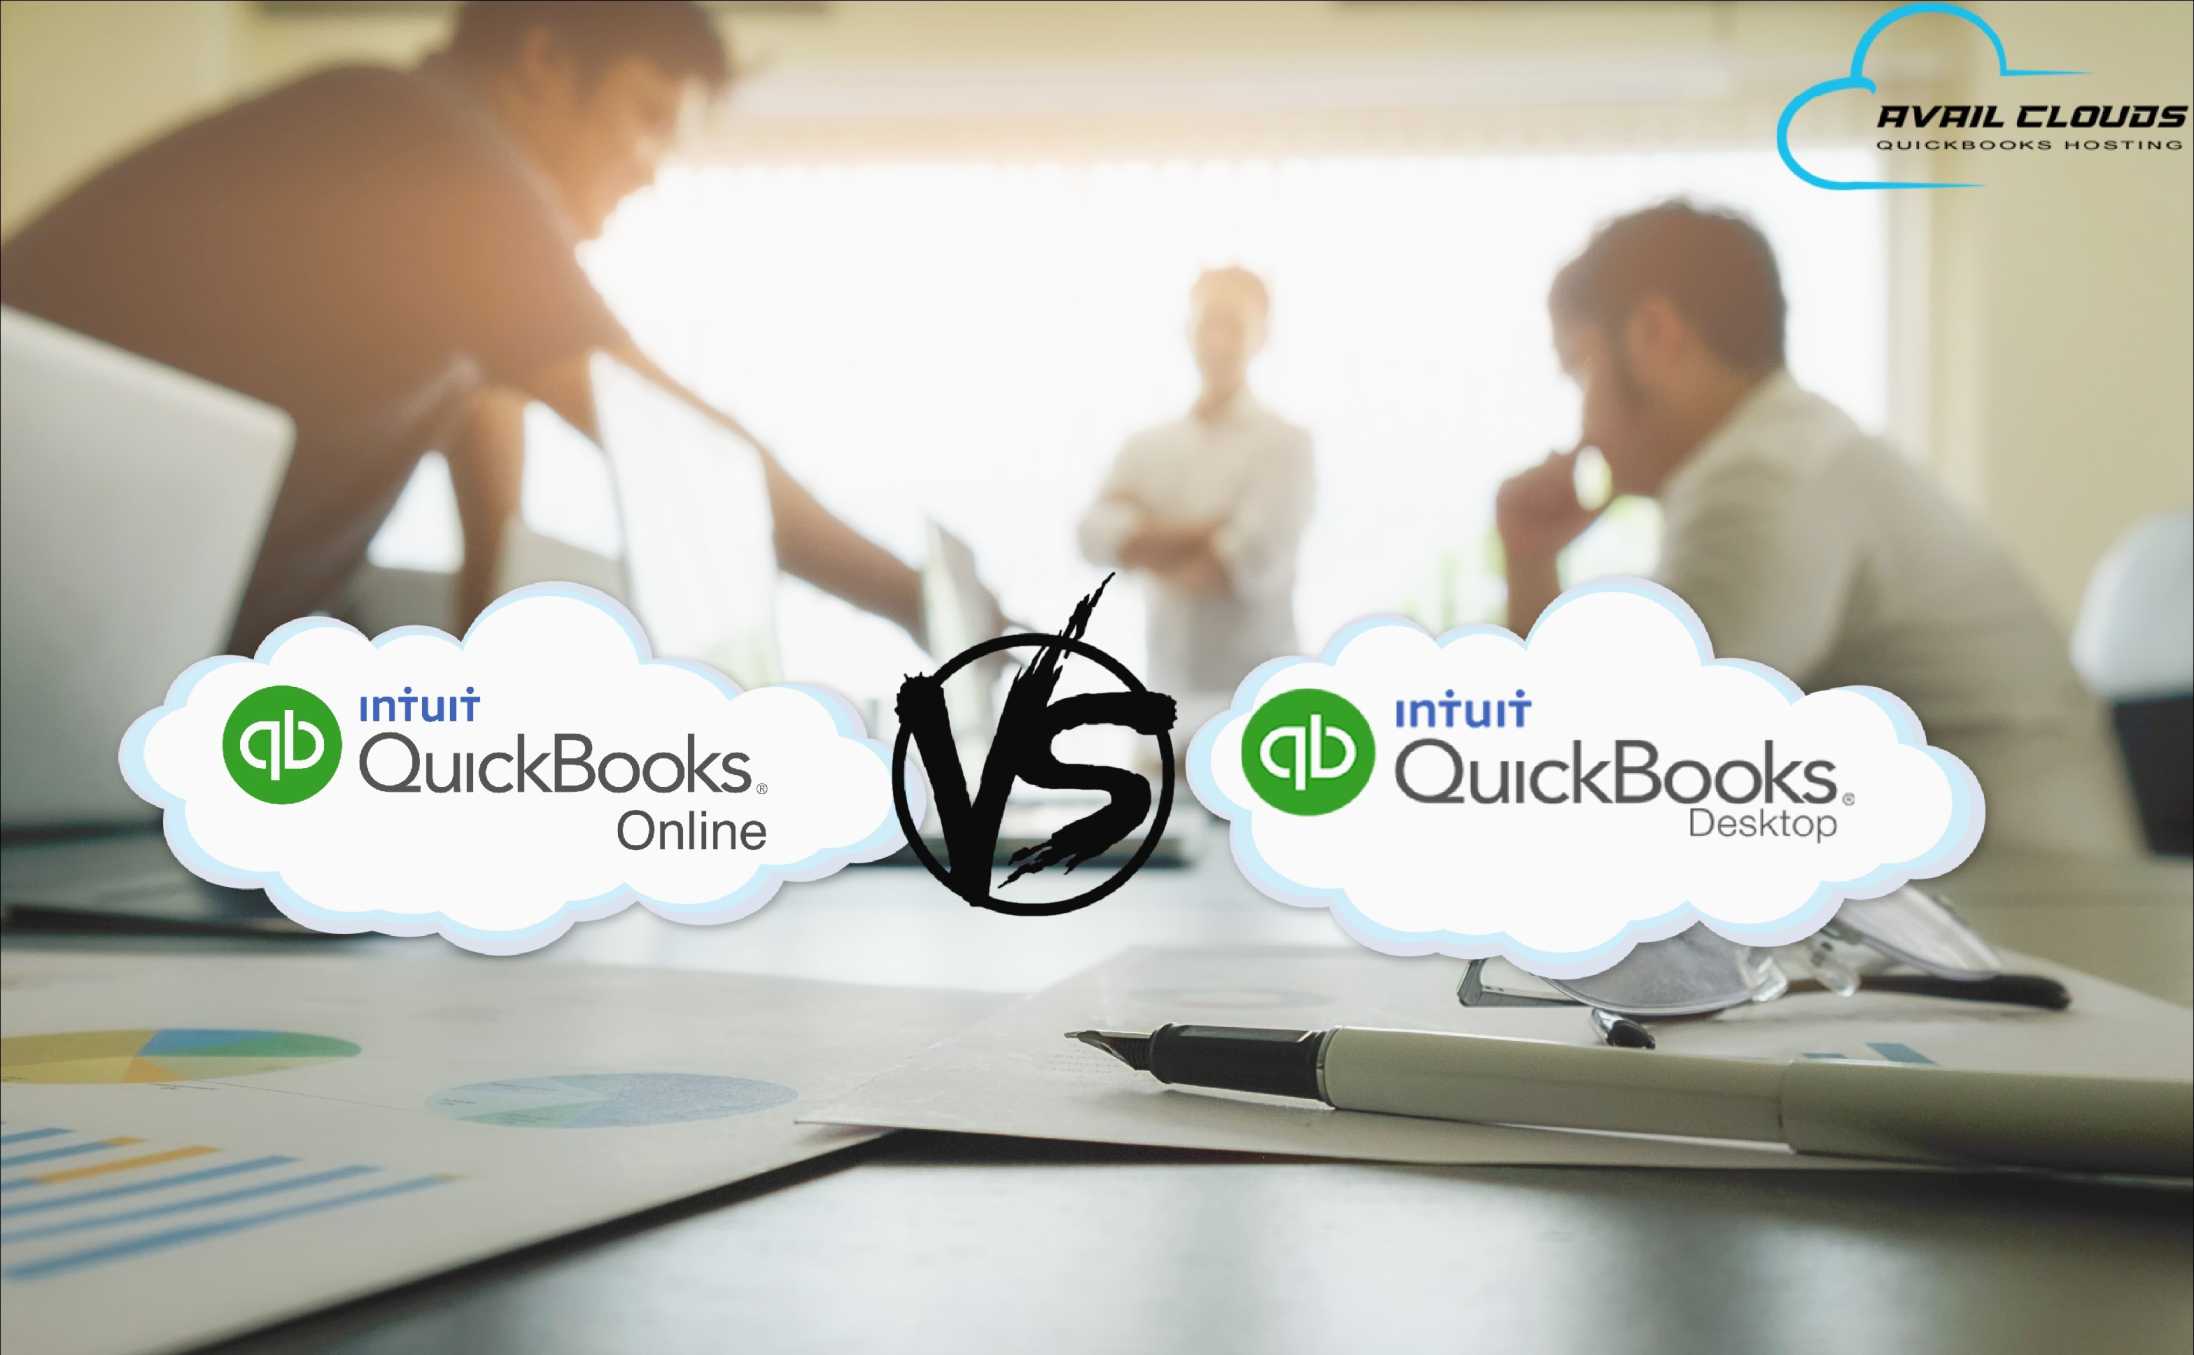 Availclouds QuickBooks Hosting